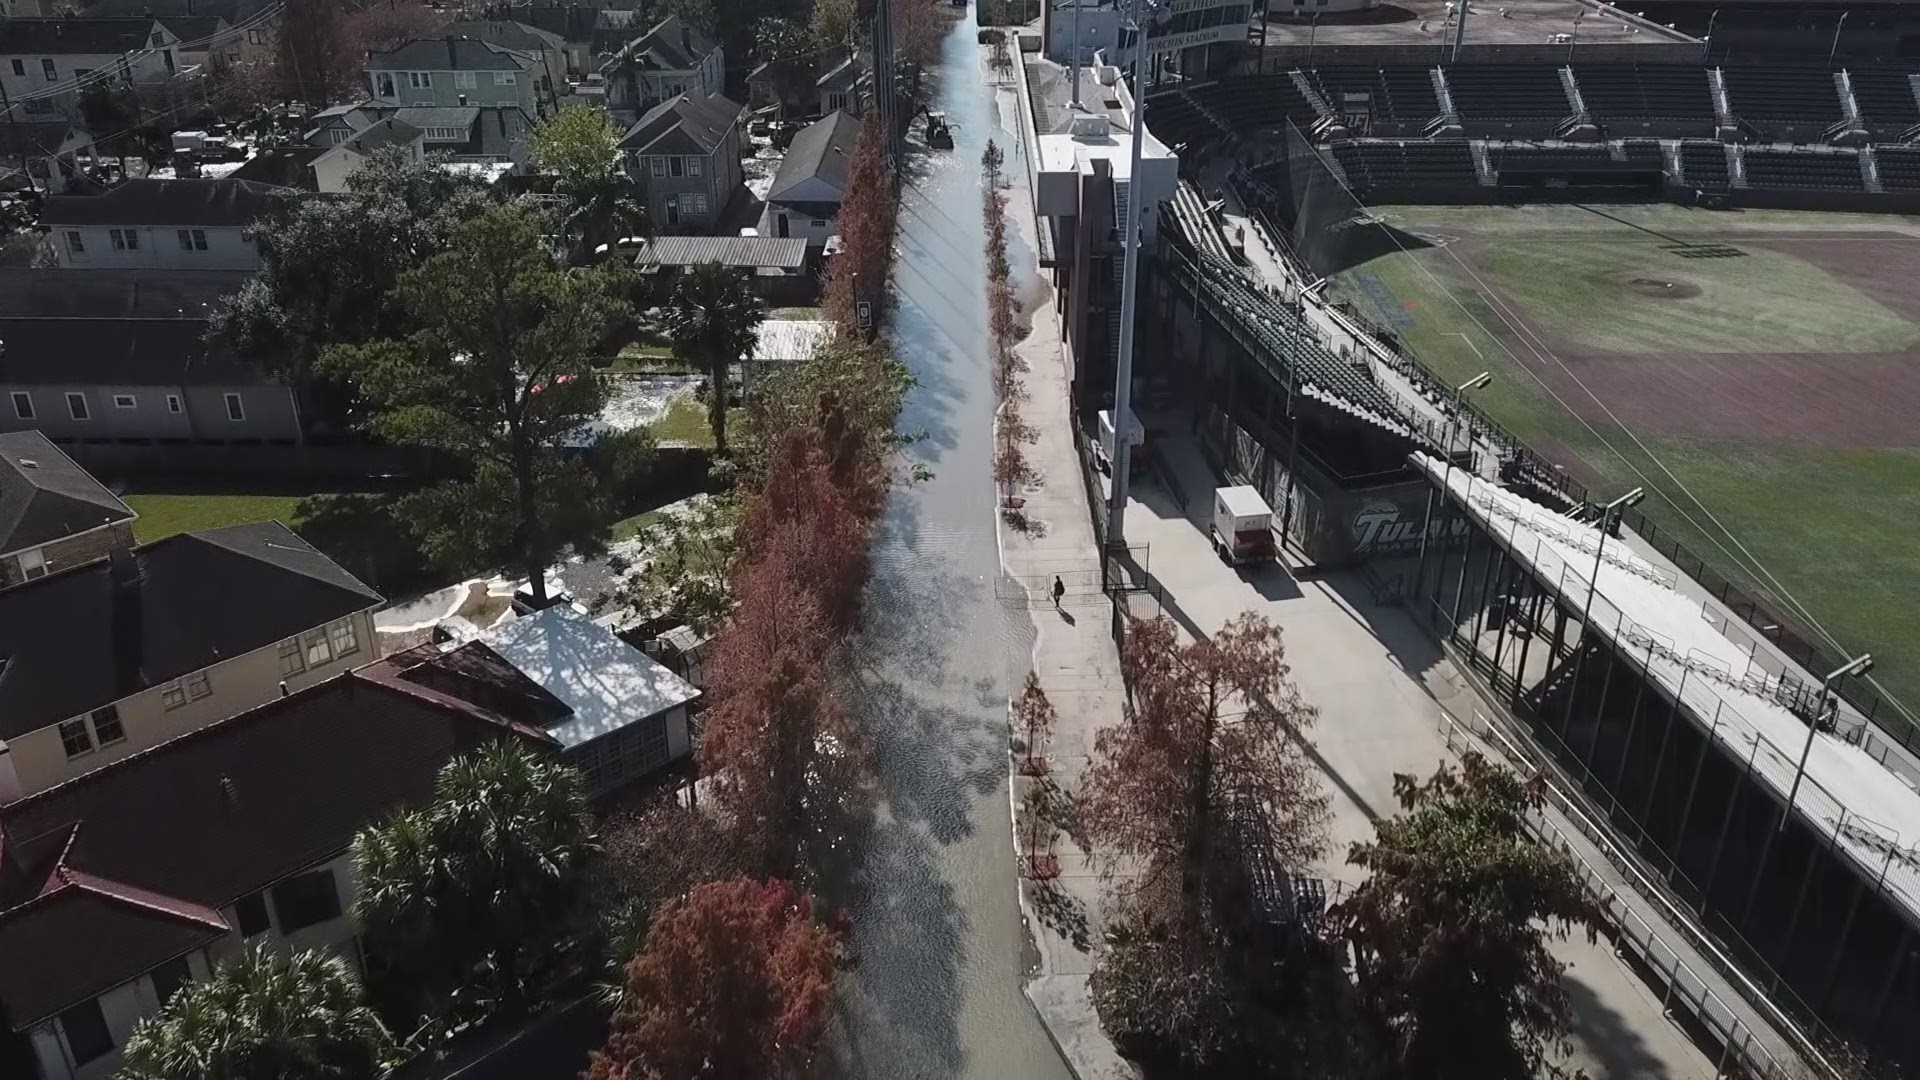 Rushing water from a broken 30-inch water main flooded blocks near Tulane University's Yulman Stadium Friday, dropping pressure and prompting a boil water alert.